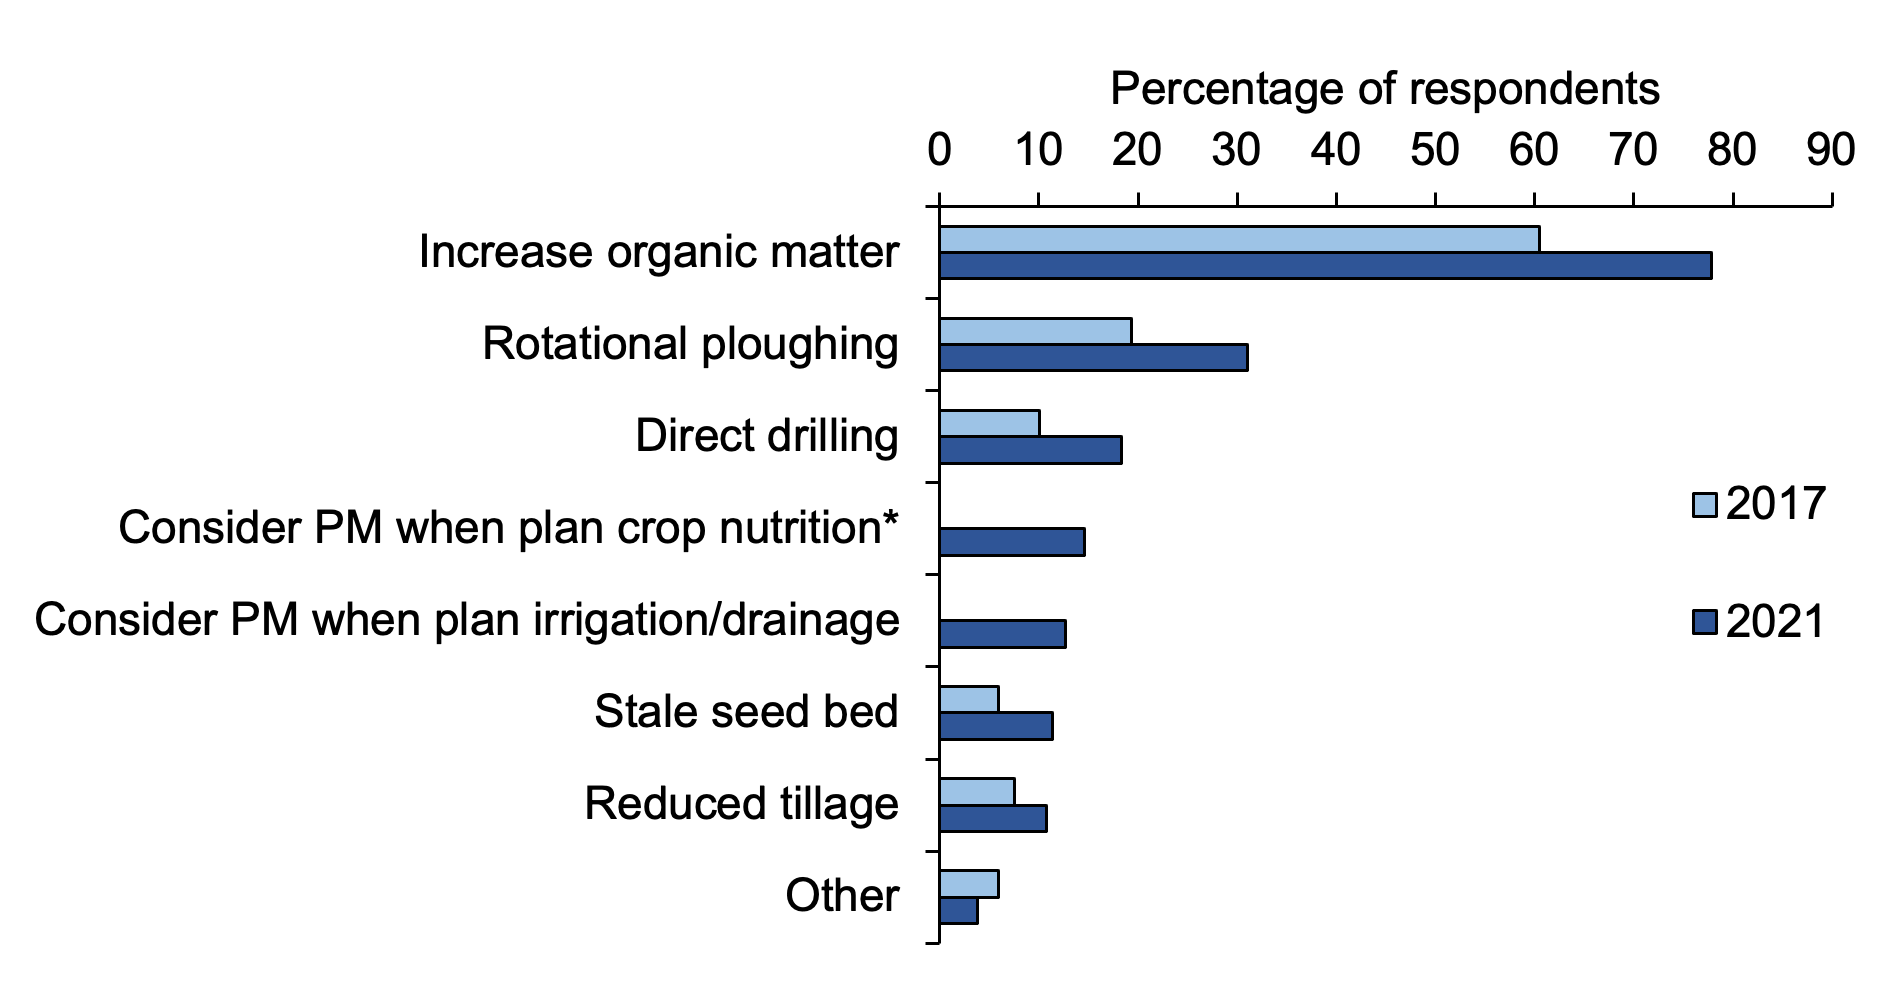 IPM: Bar chart of percentage responses to questions about seed bed cultivations where increasing soil organic matter is the most popular response in 2021.